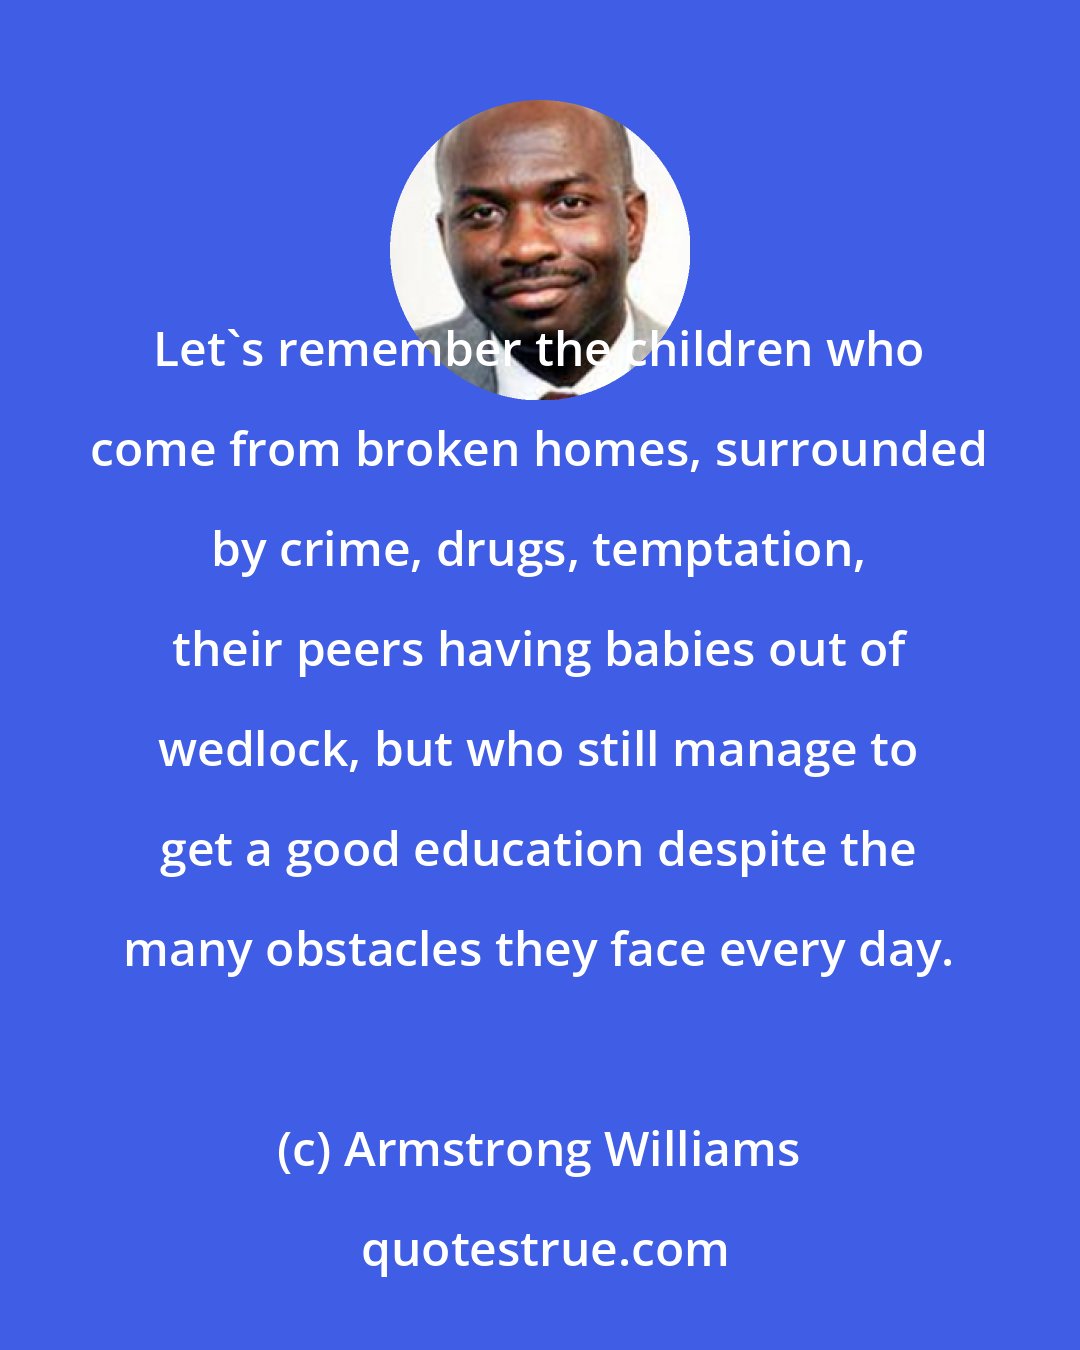 Armstrong Williams: Let's remember the children who come from broken homes, surrounded by crime, drugs, temptation, their peers having babies out of wedlock, but who still manage to get a good education despite the many obstacles they face every day.